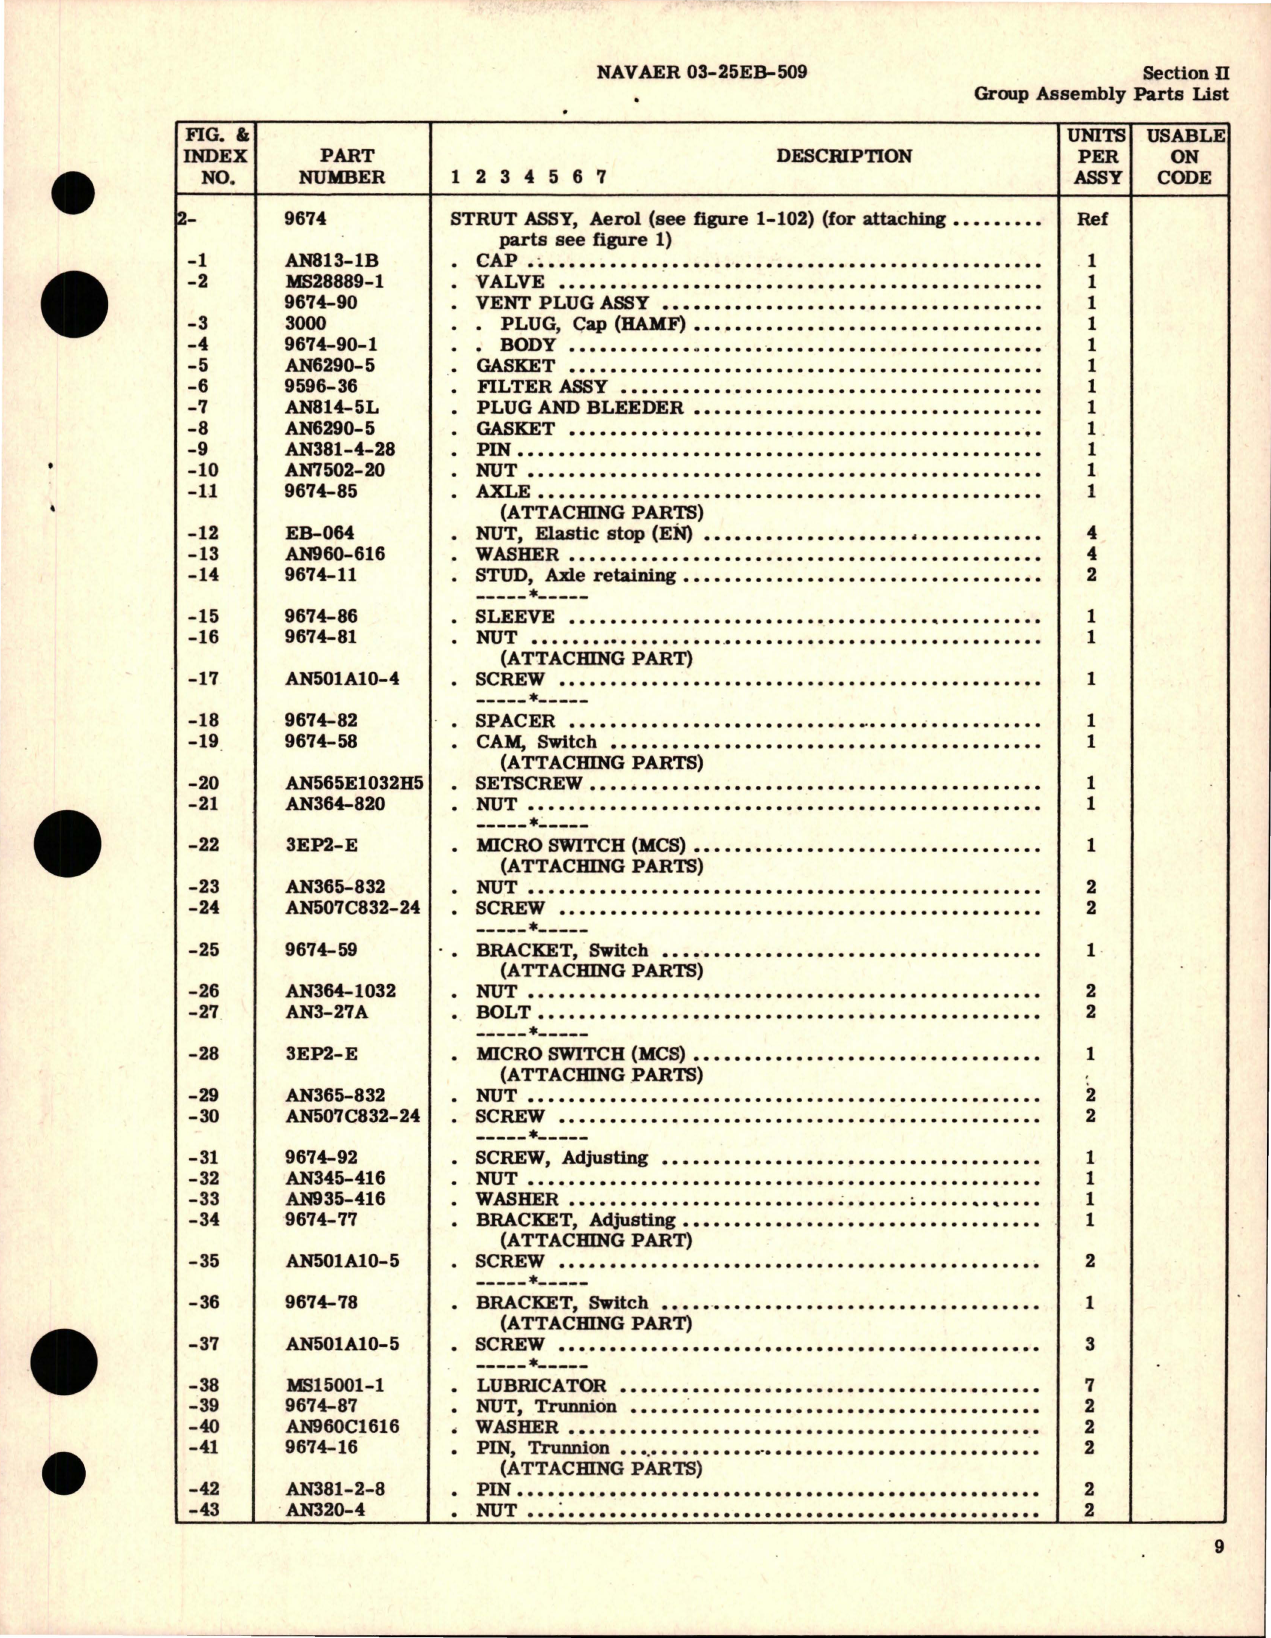 Sample page 5 from AirCorps Library document: Illustrated Parts Breakdown for Gear Assembly - Part 9684